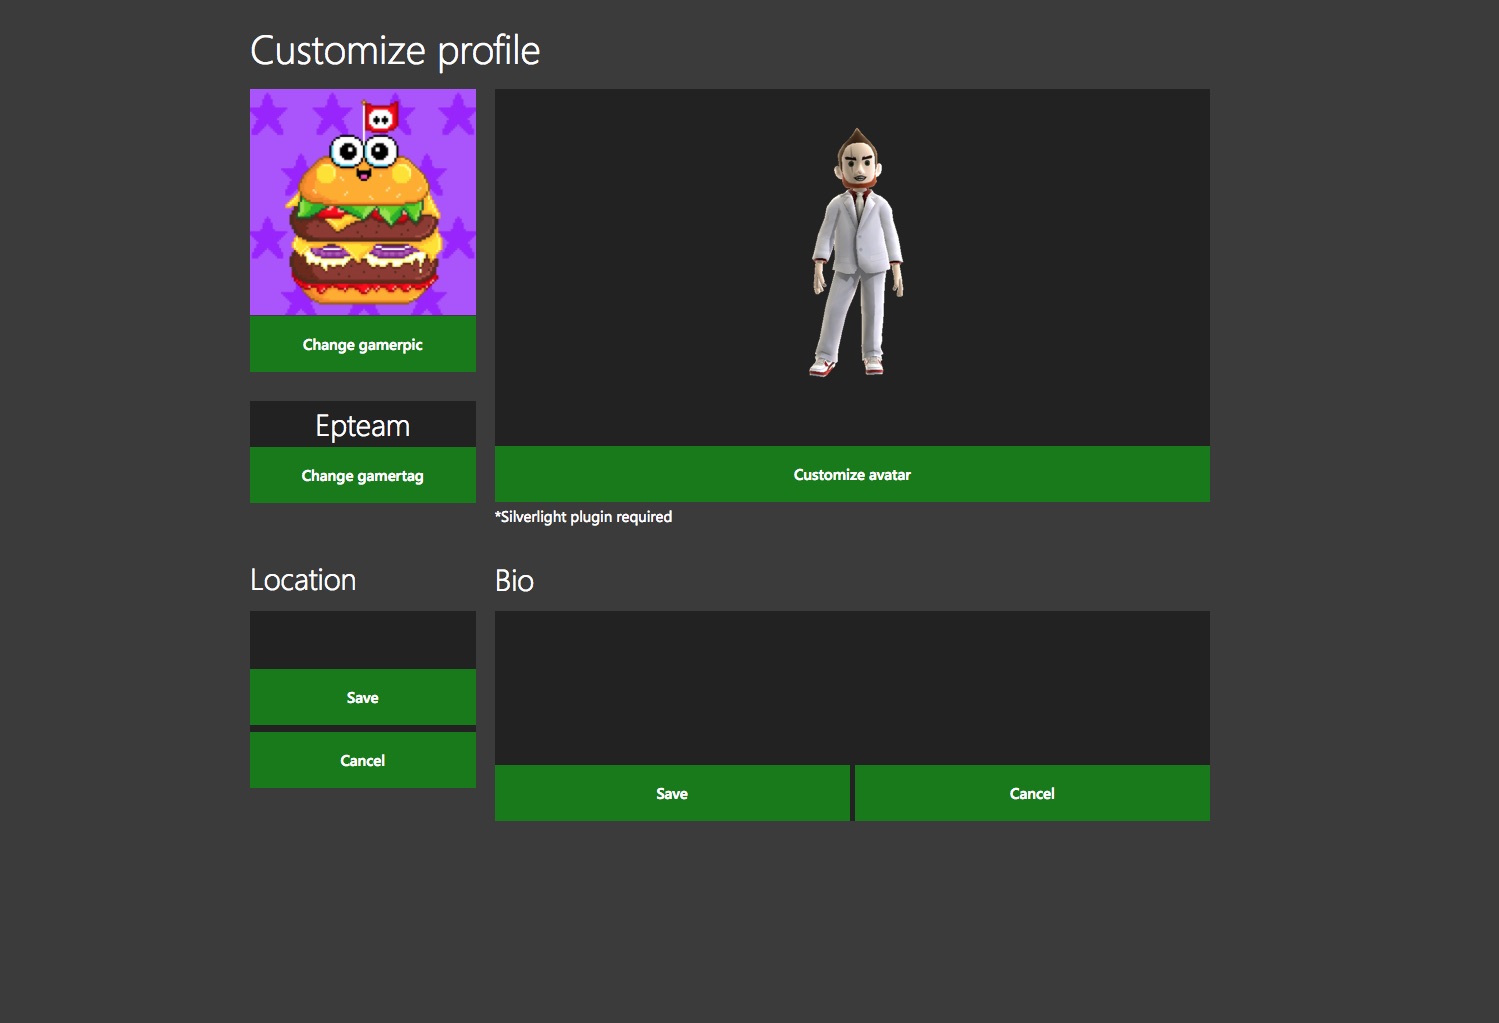 How to Change Your Xbox Gamertag on Profile? (Full Steps)